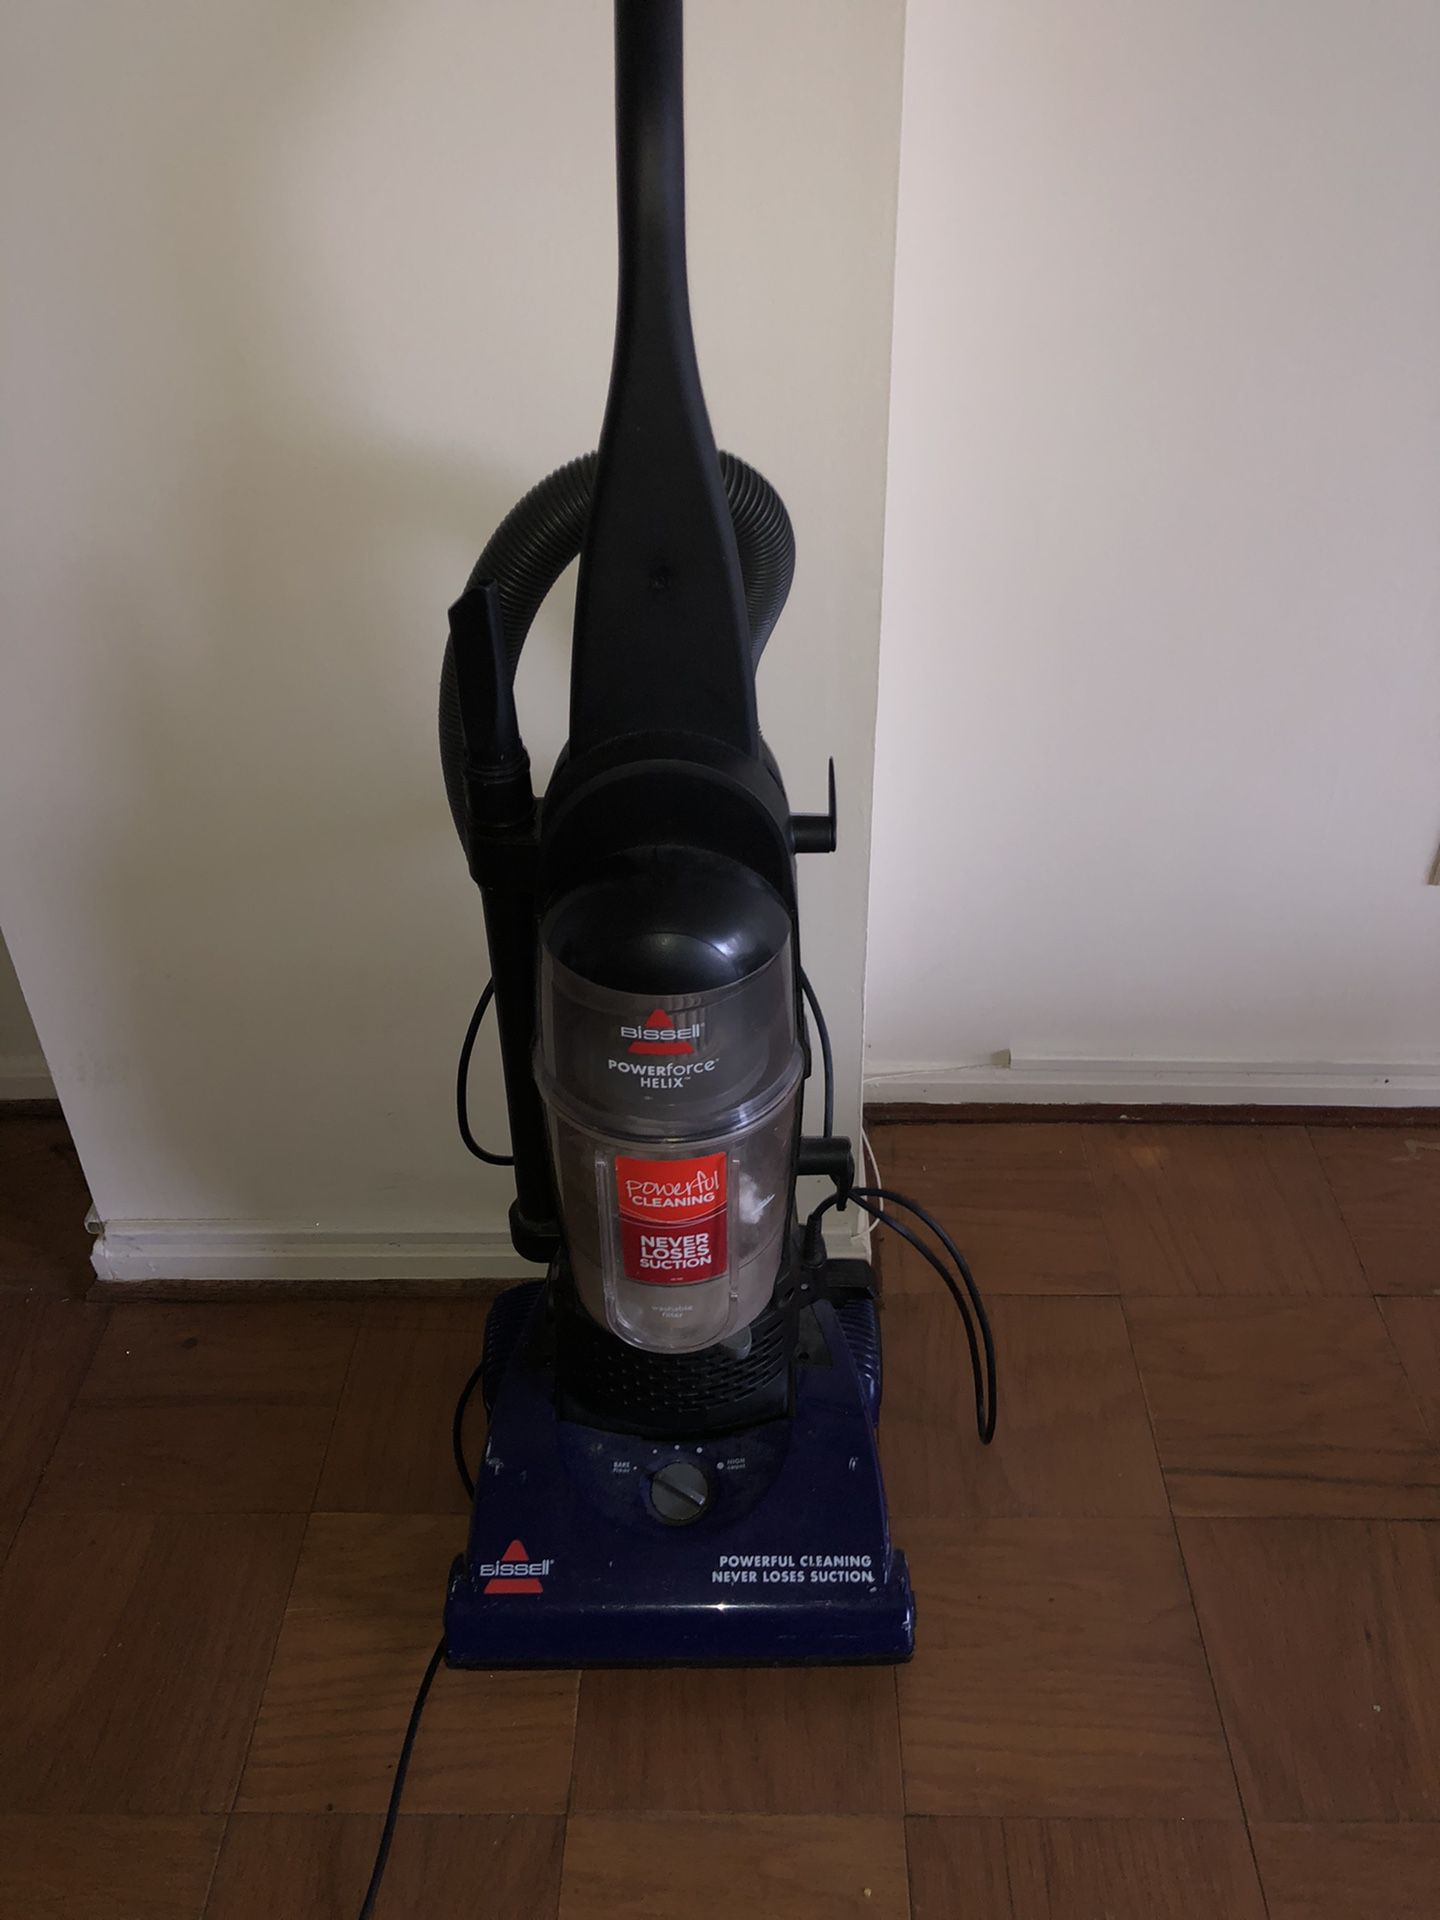 Working Vacuum cleaner for sale !